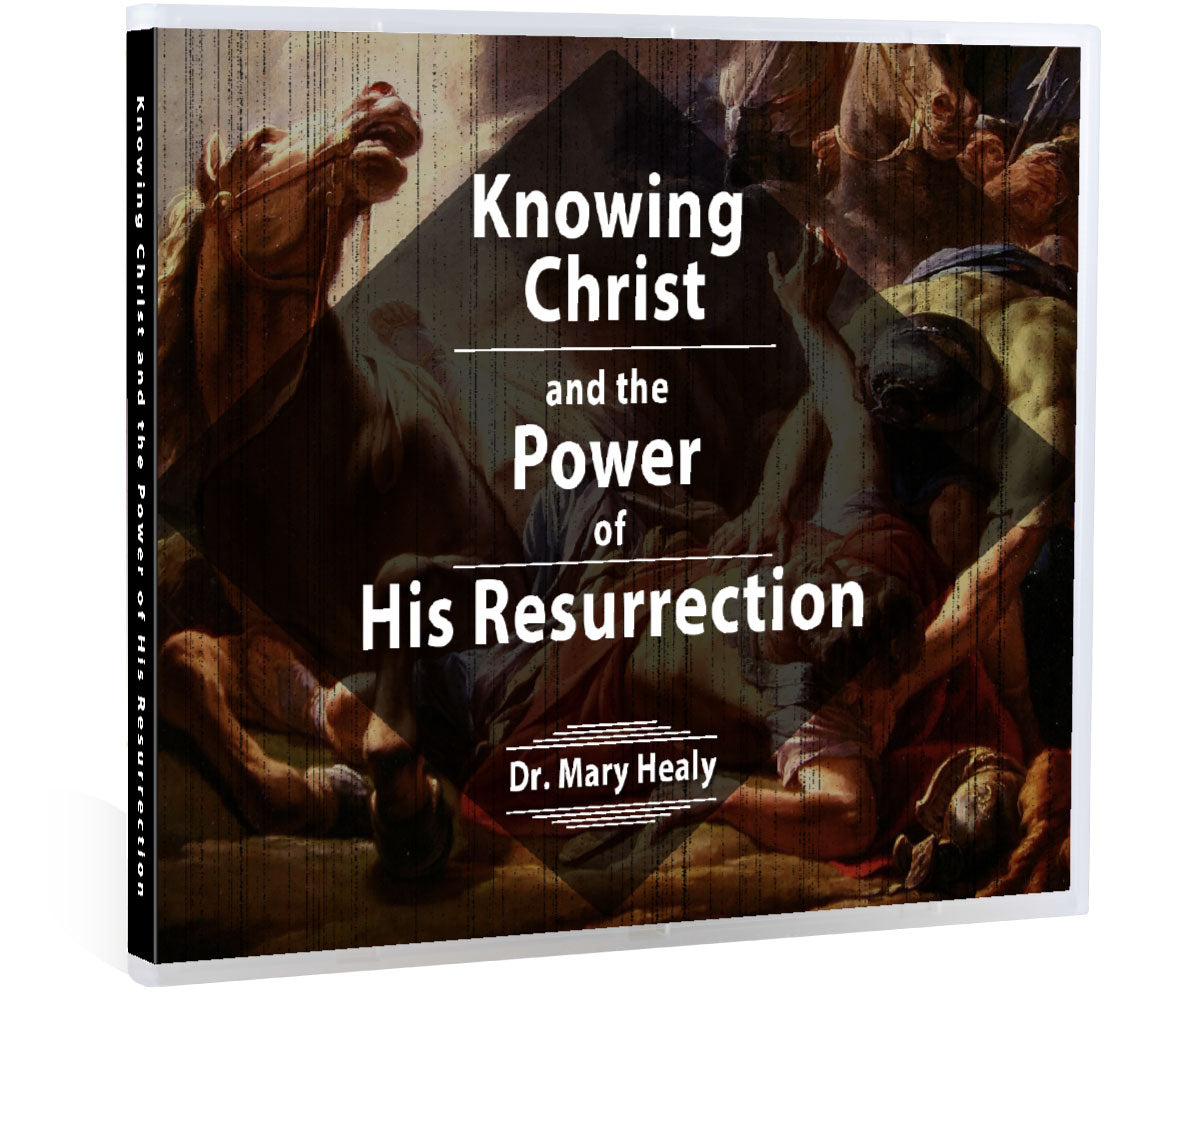 Knowing Christ and the Power of His Resurrection